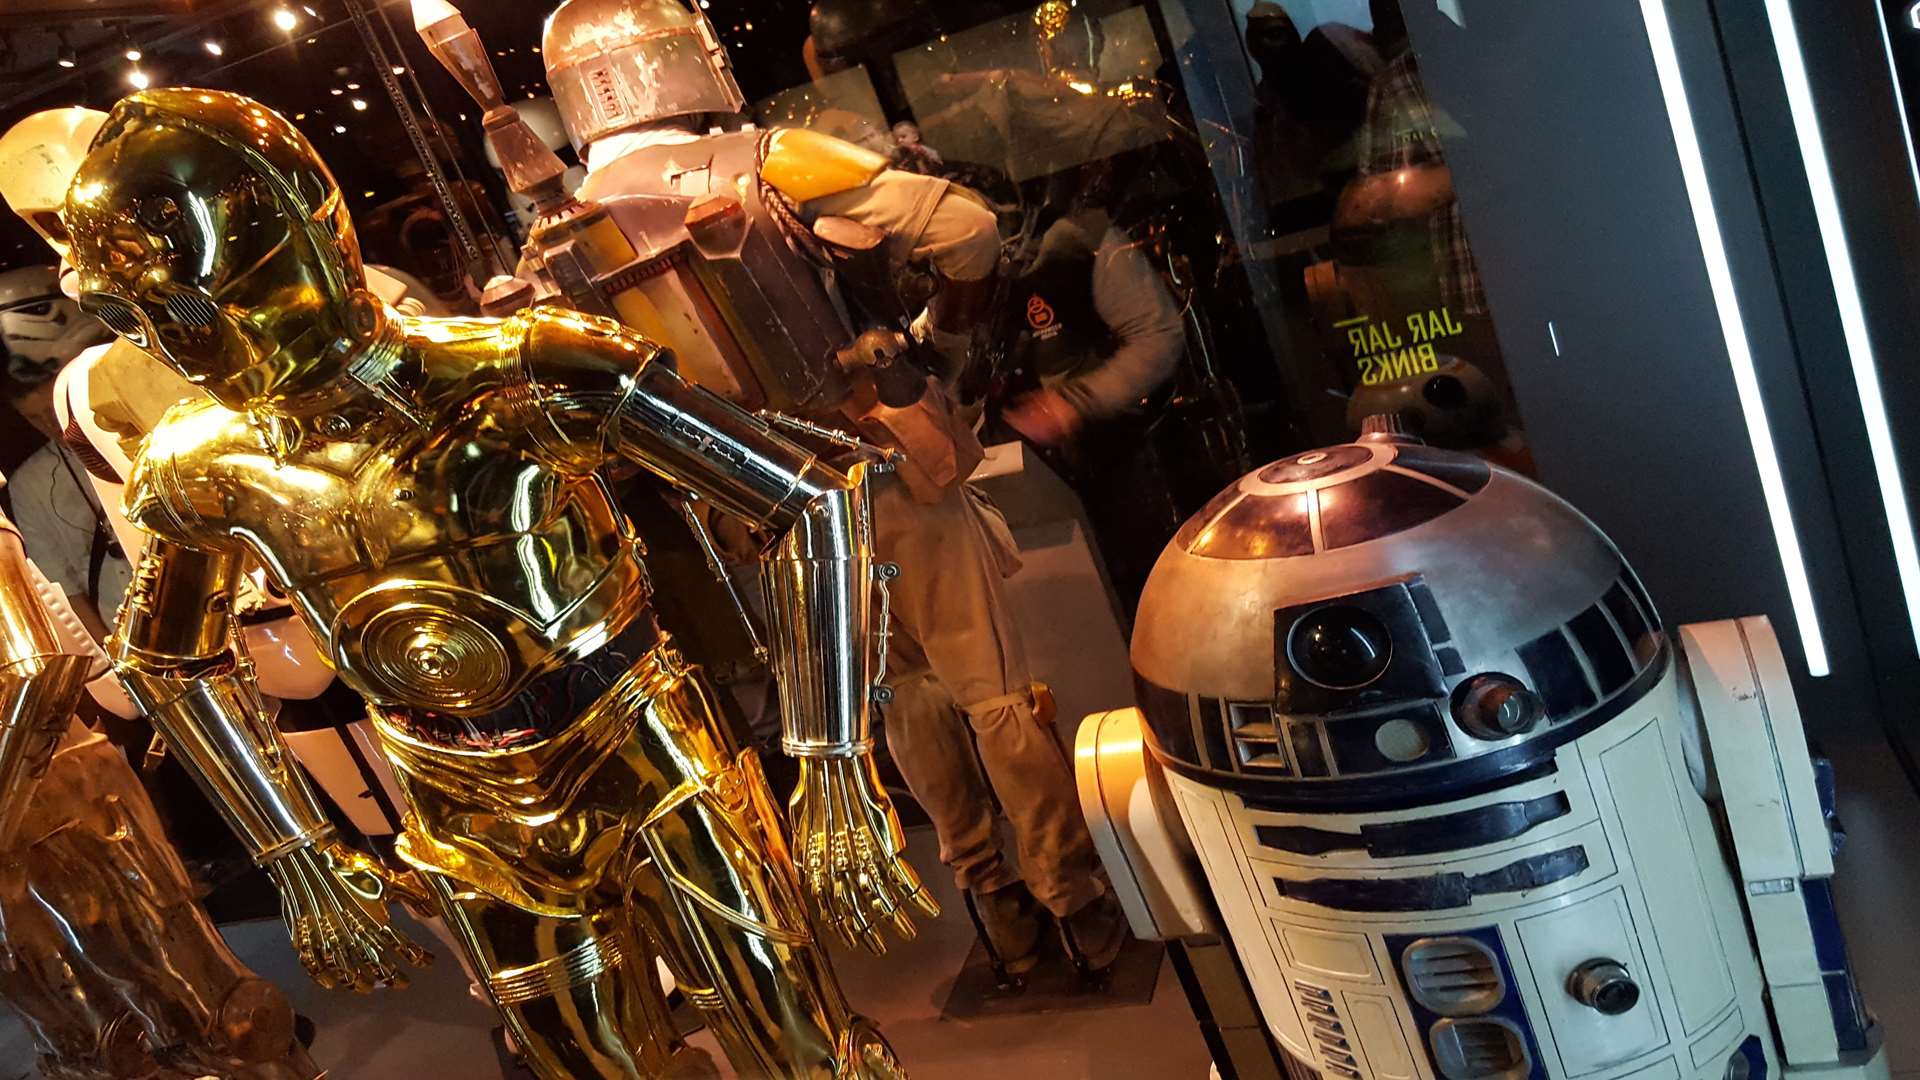 C-3PO and R2-D2 at the Star Wars Identities exhibition at the O2